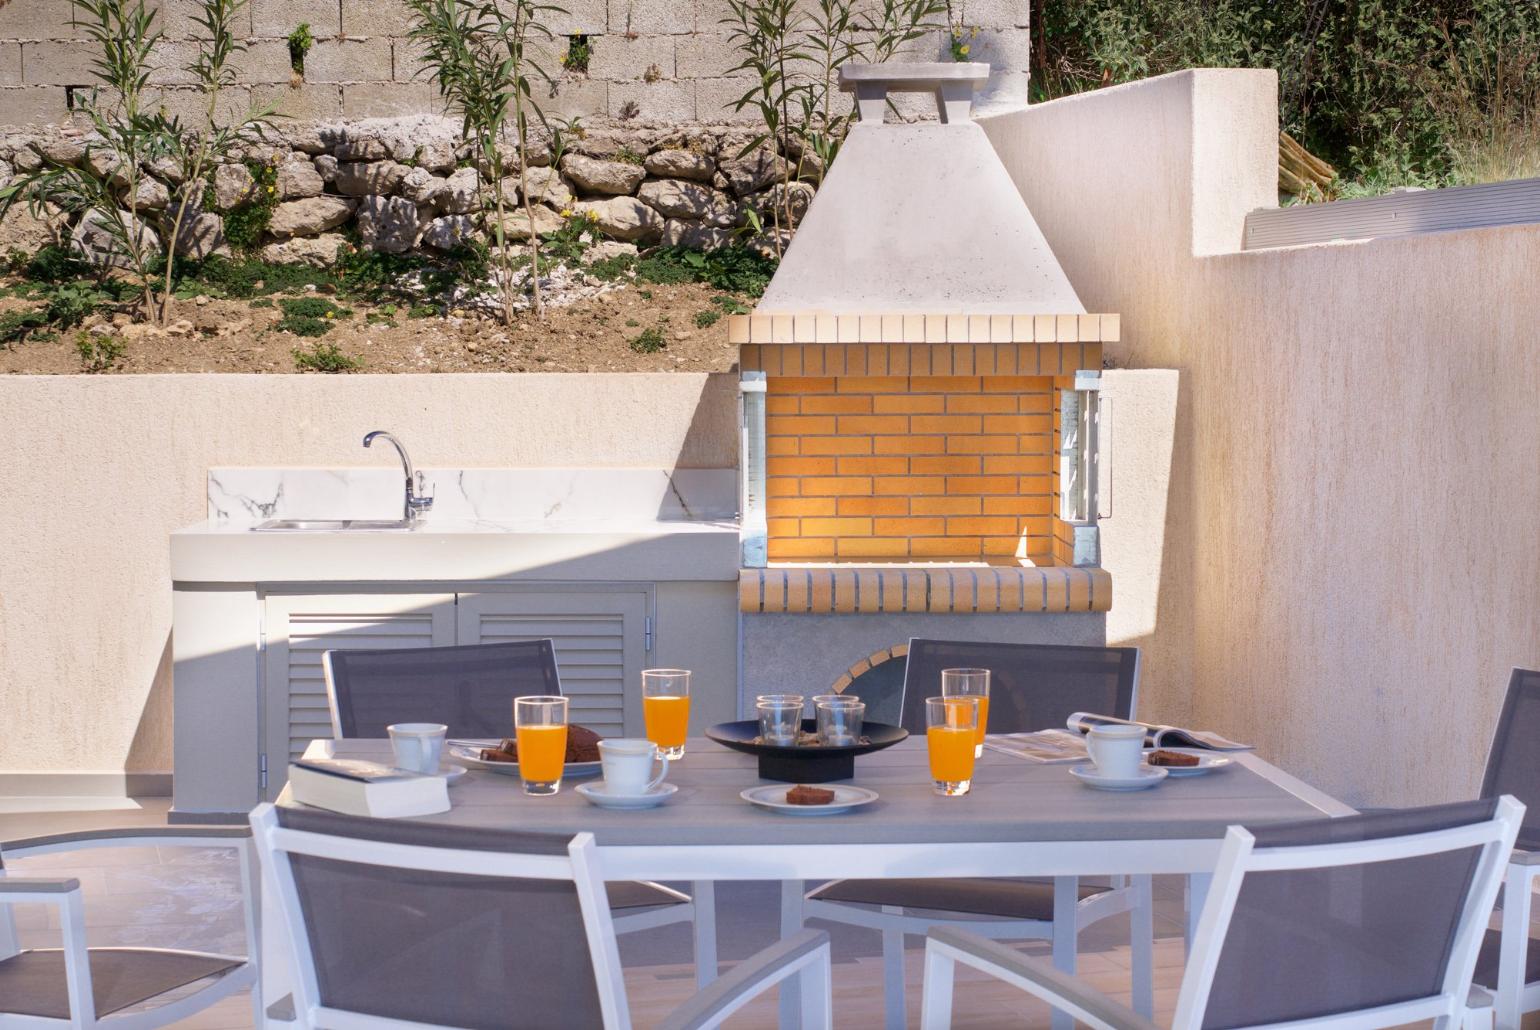 Outdoor dining area with BBQ